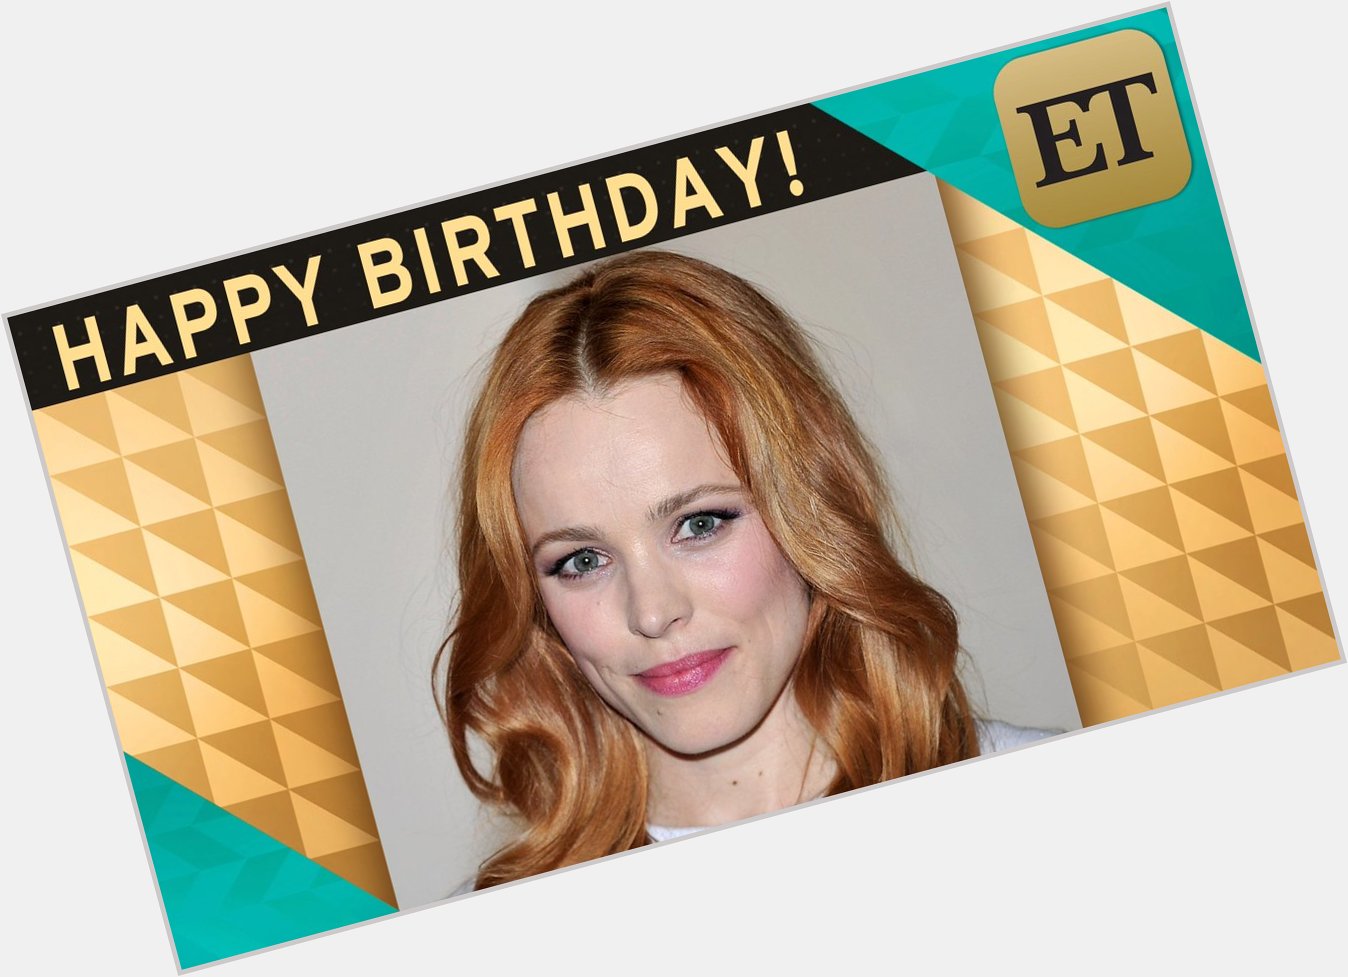 Happy birthday, Rachel McAdams! She\s 37 but looks like she hasn\t aged a day in more than a decade. 